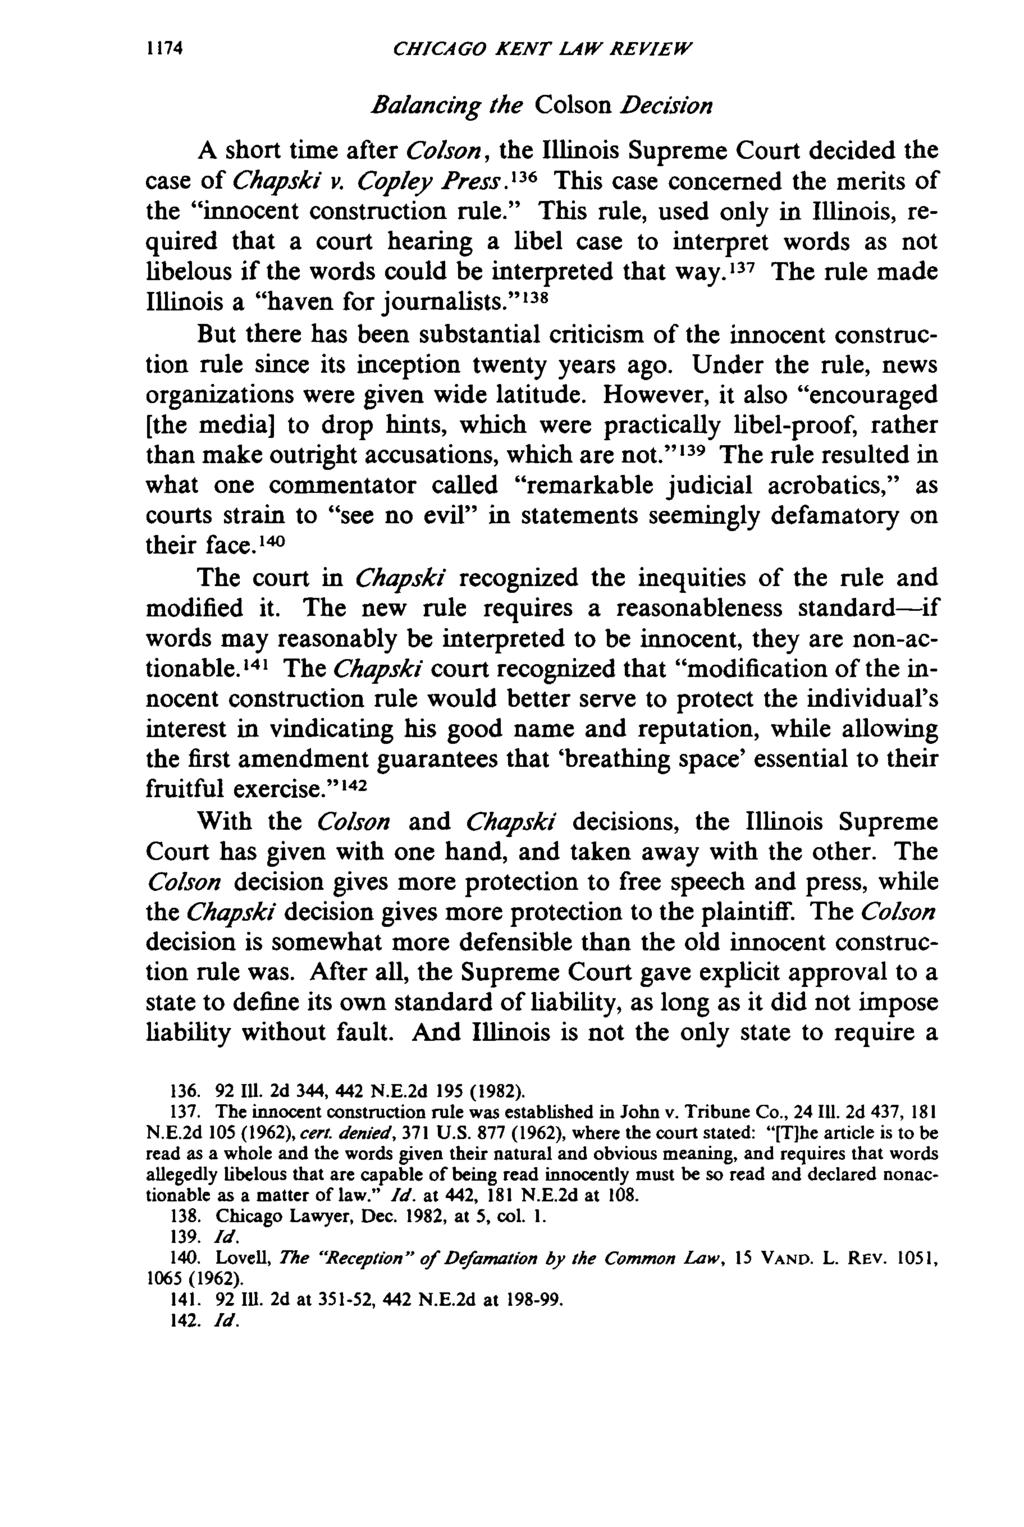 CHICAGO KENT LAW REVIEW Balancing the Colson Decision A short time after Colson, the Illinois Supreme Court decided the case of Chapski v. Copley Press.